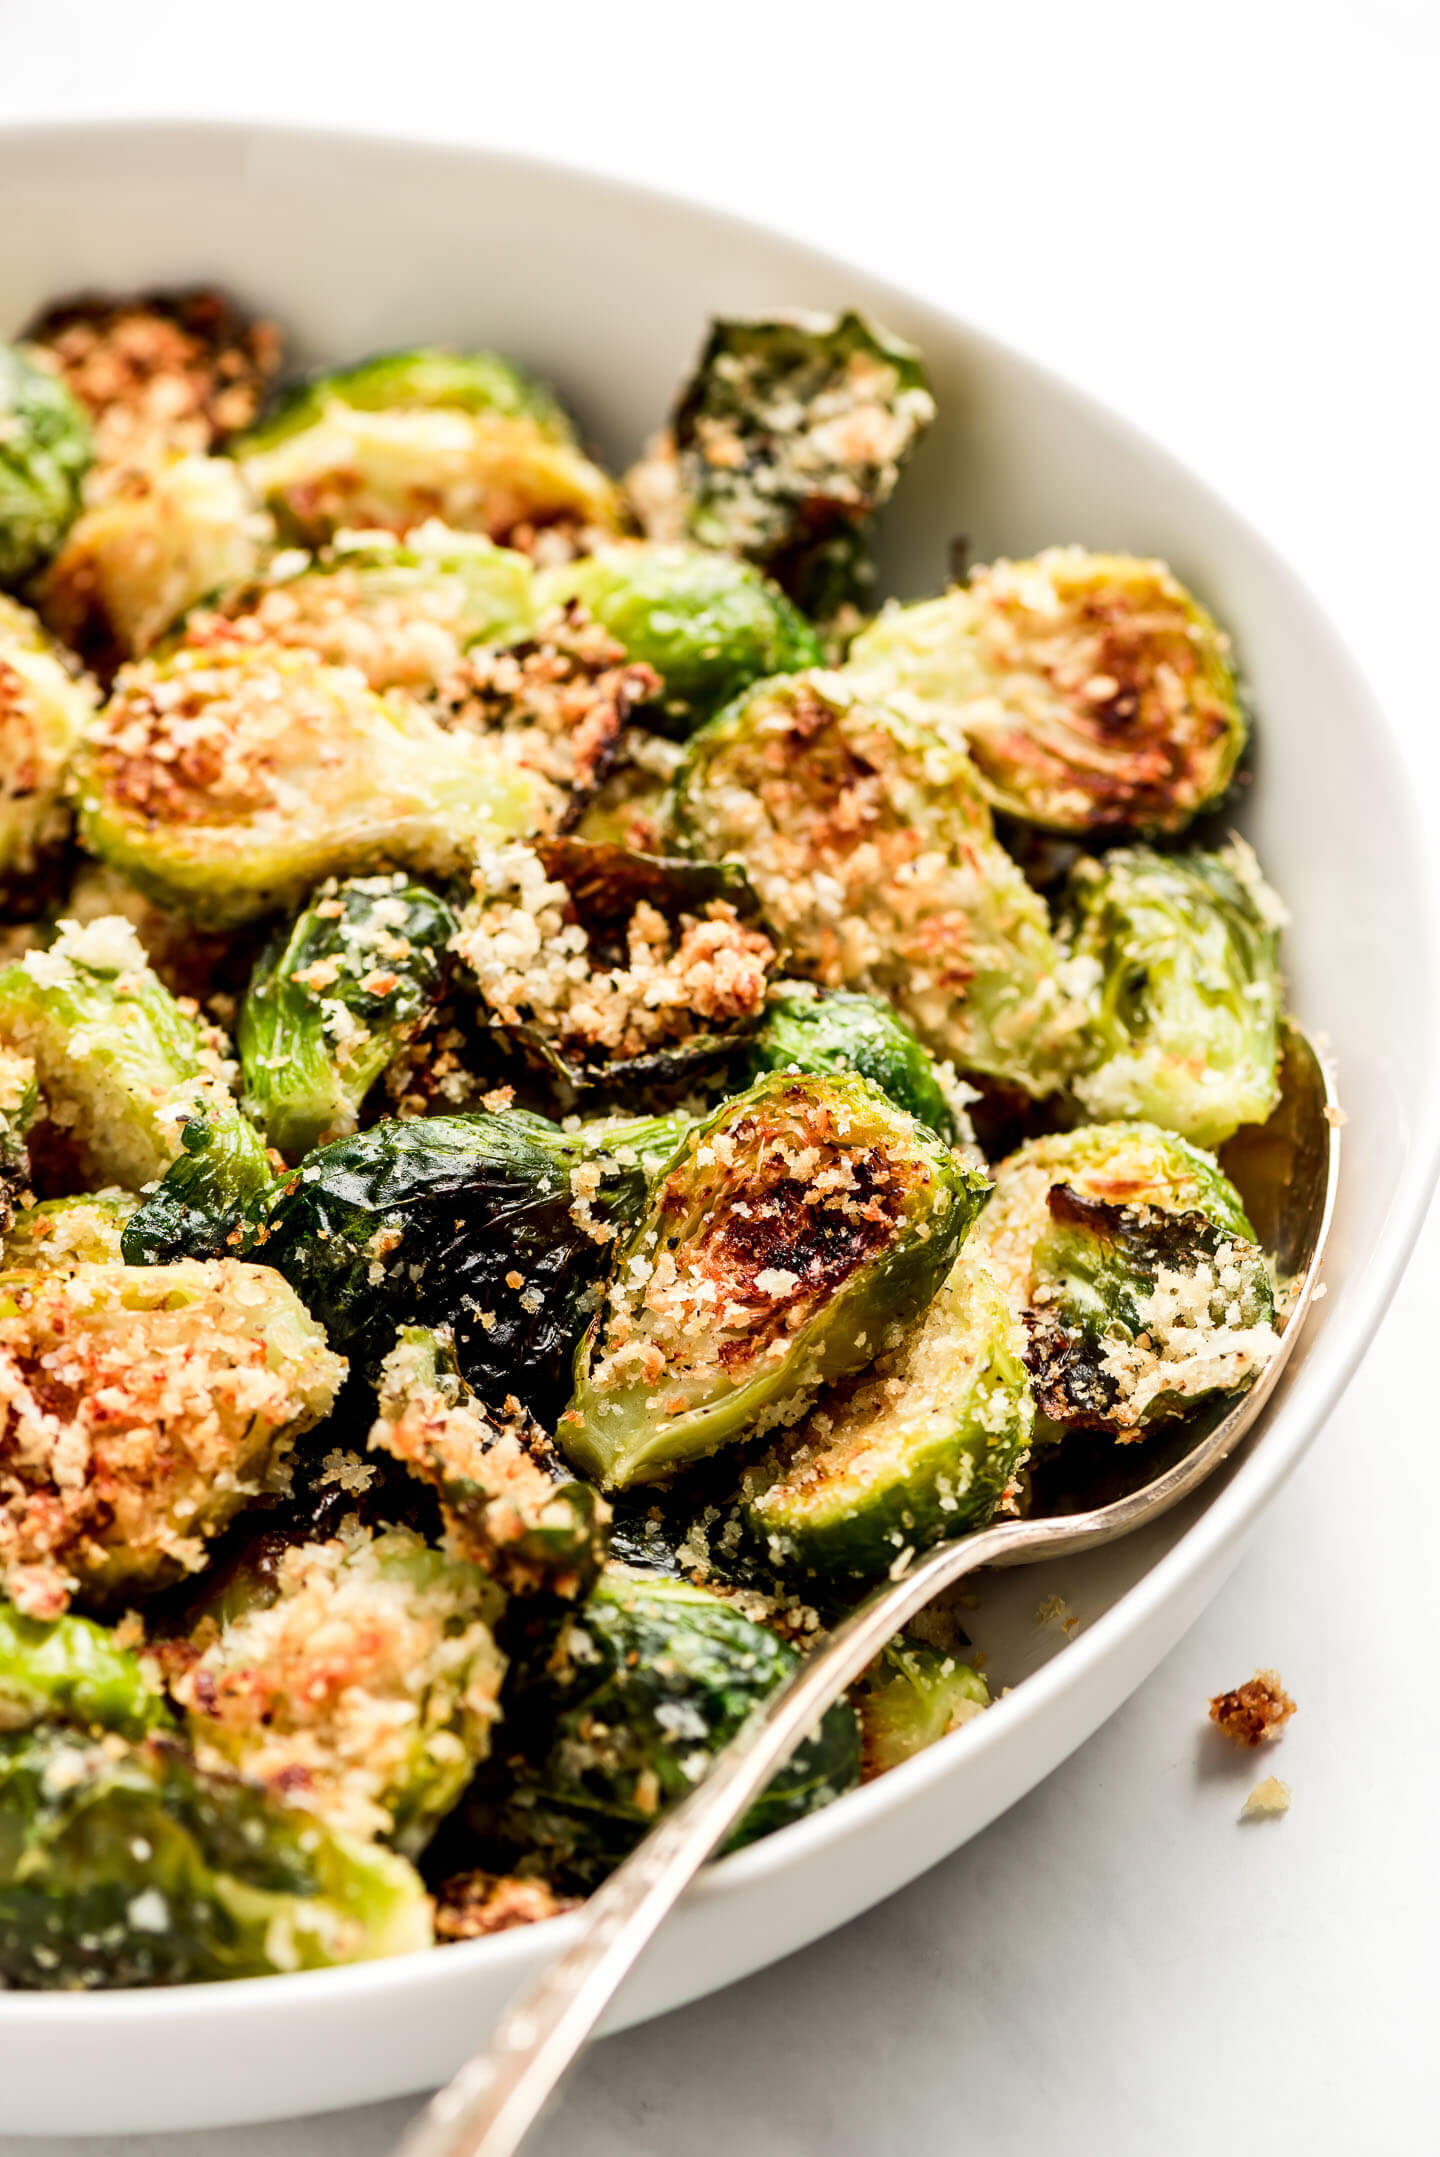 Parmesan Brussels Sprouts in a white serving bowl with a spoon in the side.